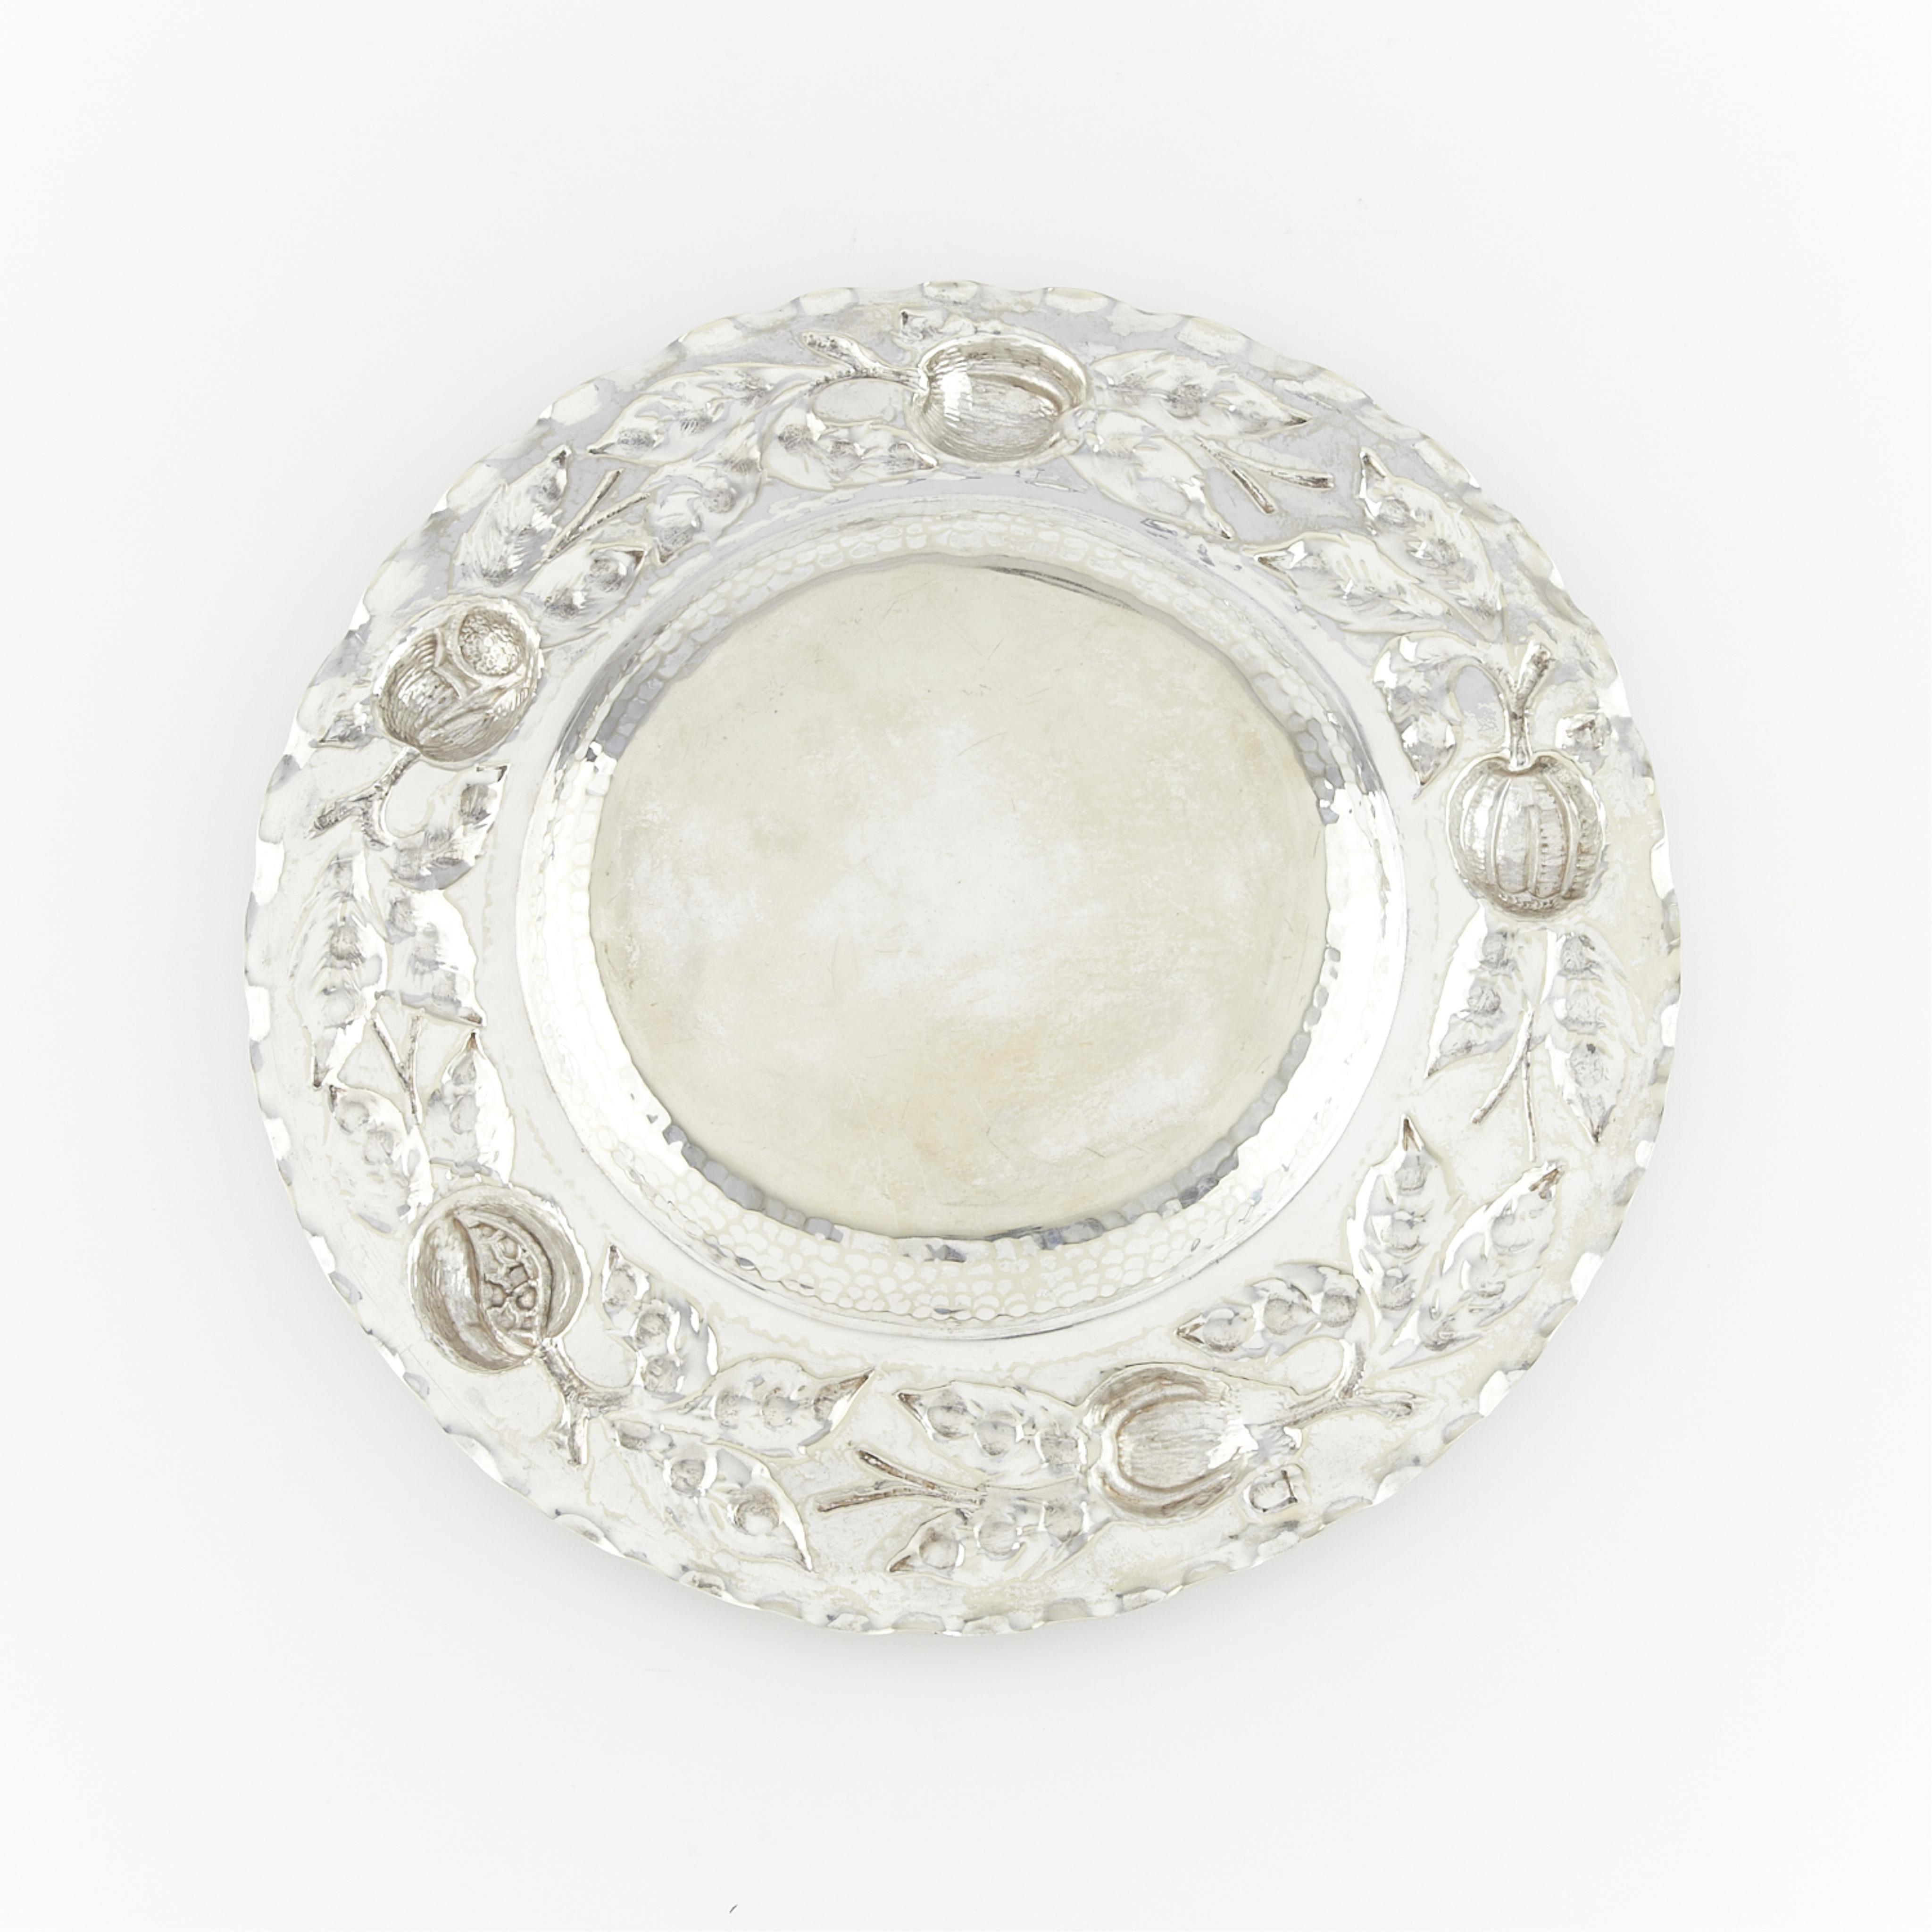 Colonial Silverplate Repousee Platter - Image 3 of 4